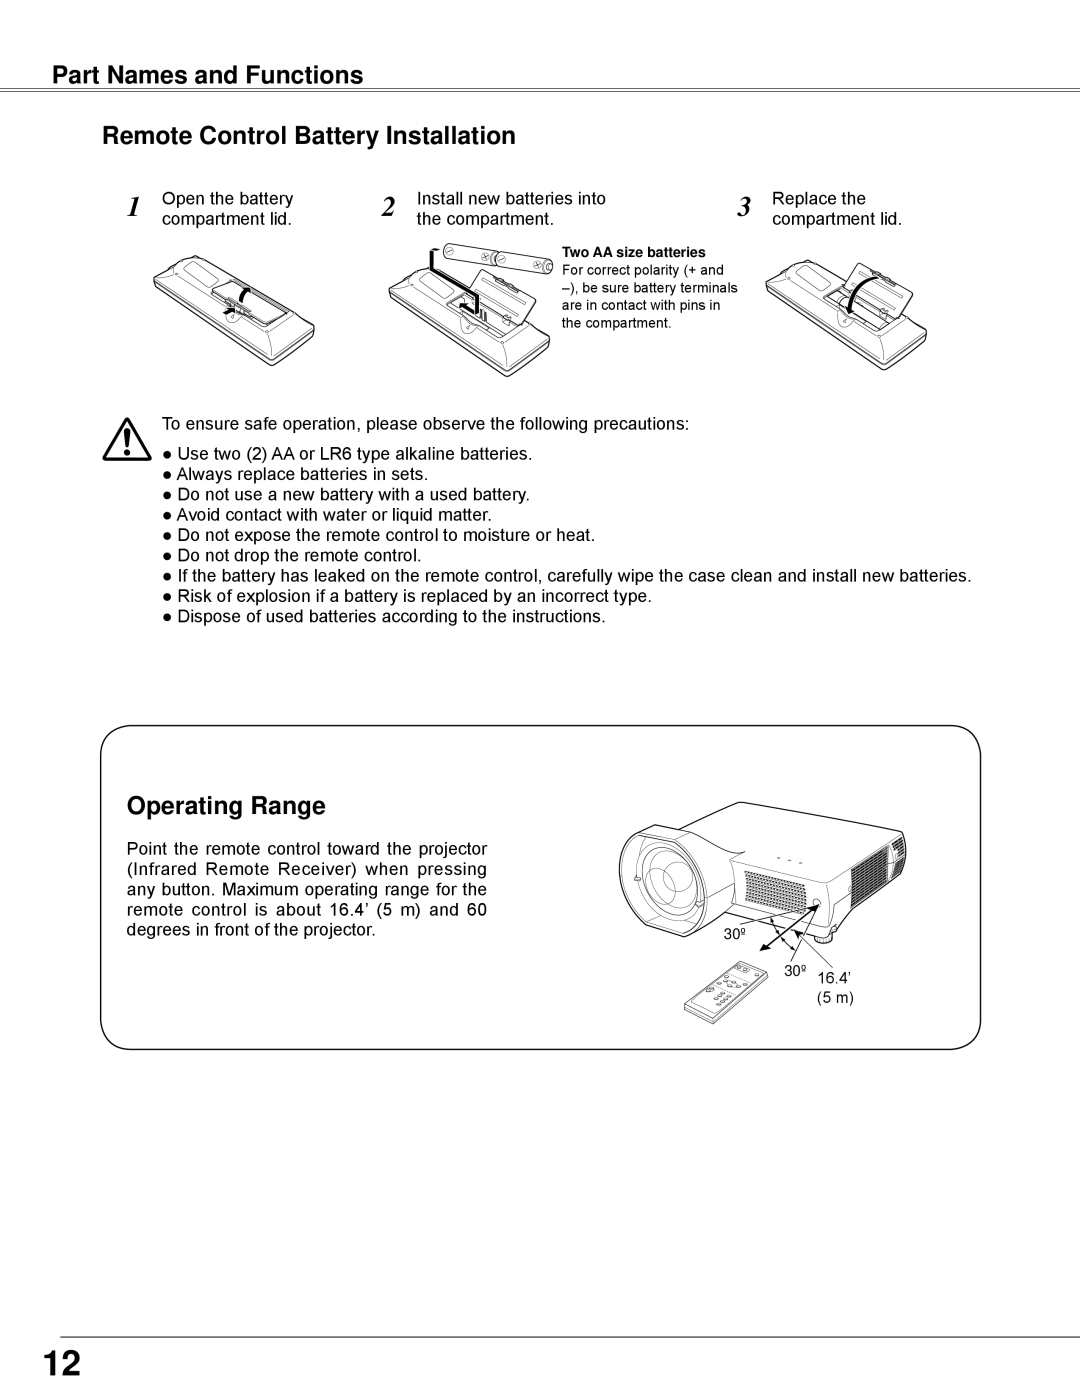 Sanyo PLC-WXE45 owner manual Remote Control Battery Installation, Operating Range, Part Names and Functions 